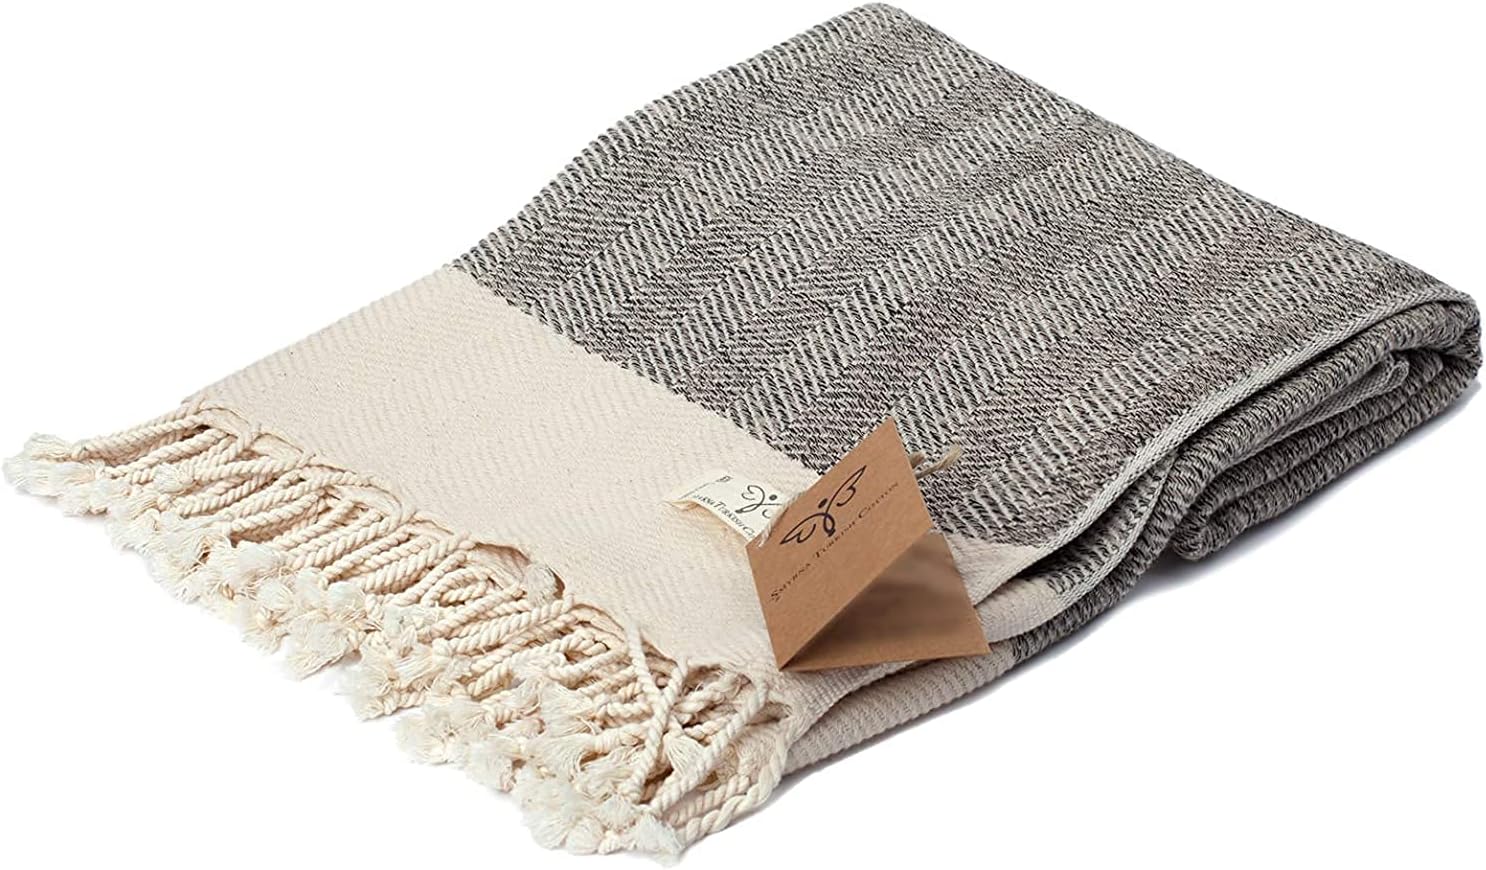 Smyrna Turkish Cotton Herringbone Series Table Runner 100% Cotton|Rectangular Table Cover & Protective Table Cloth|Made in Turkey|Doesn't Shrink| Premium Luxury (Beige, 38 x 182 cm) 5